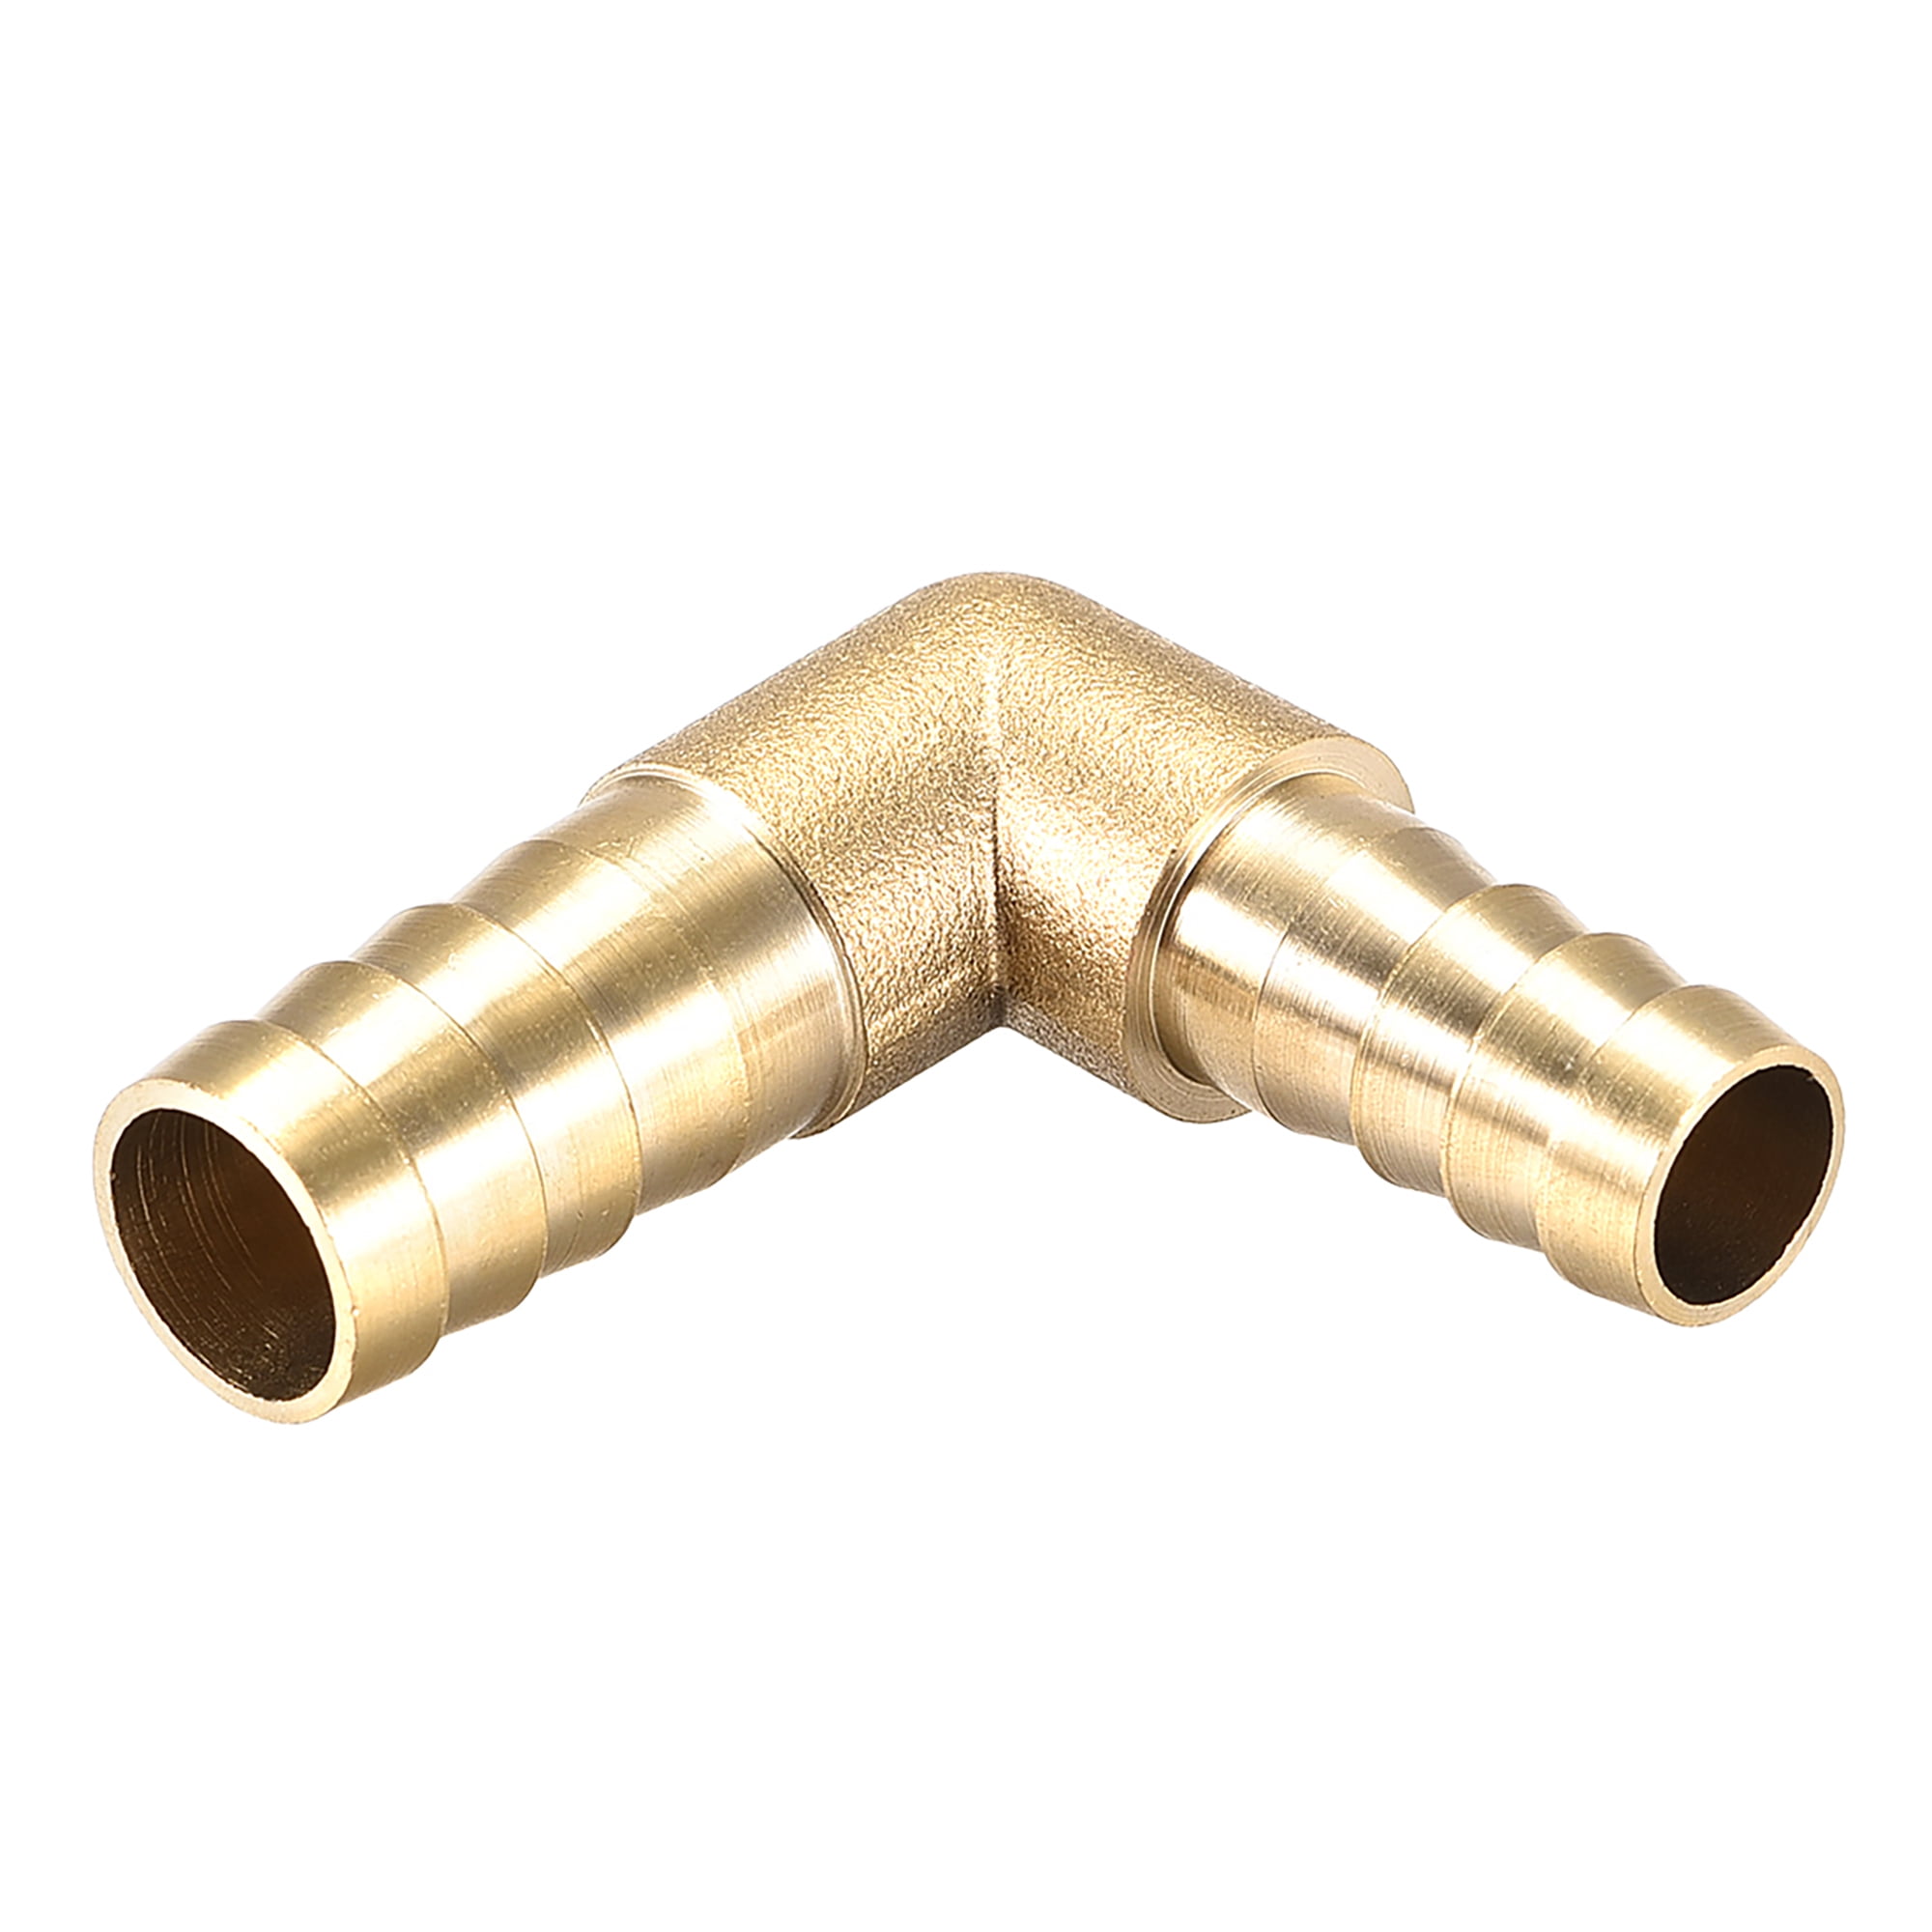 Pipes & Hoses 10pcs Brass Hose Barb Fitting Elbow 6mm 8mm 10mm 12mm 16mm To 1/4 1/8 1/2 3/8 BSP Male Thread Barbed Coupling Connector Joint Adapter Tubes 